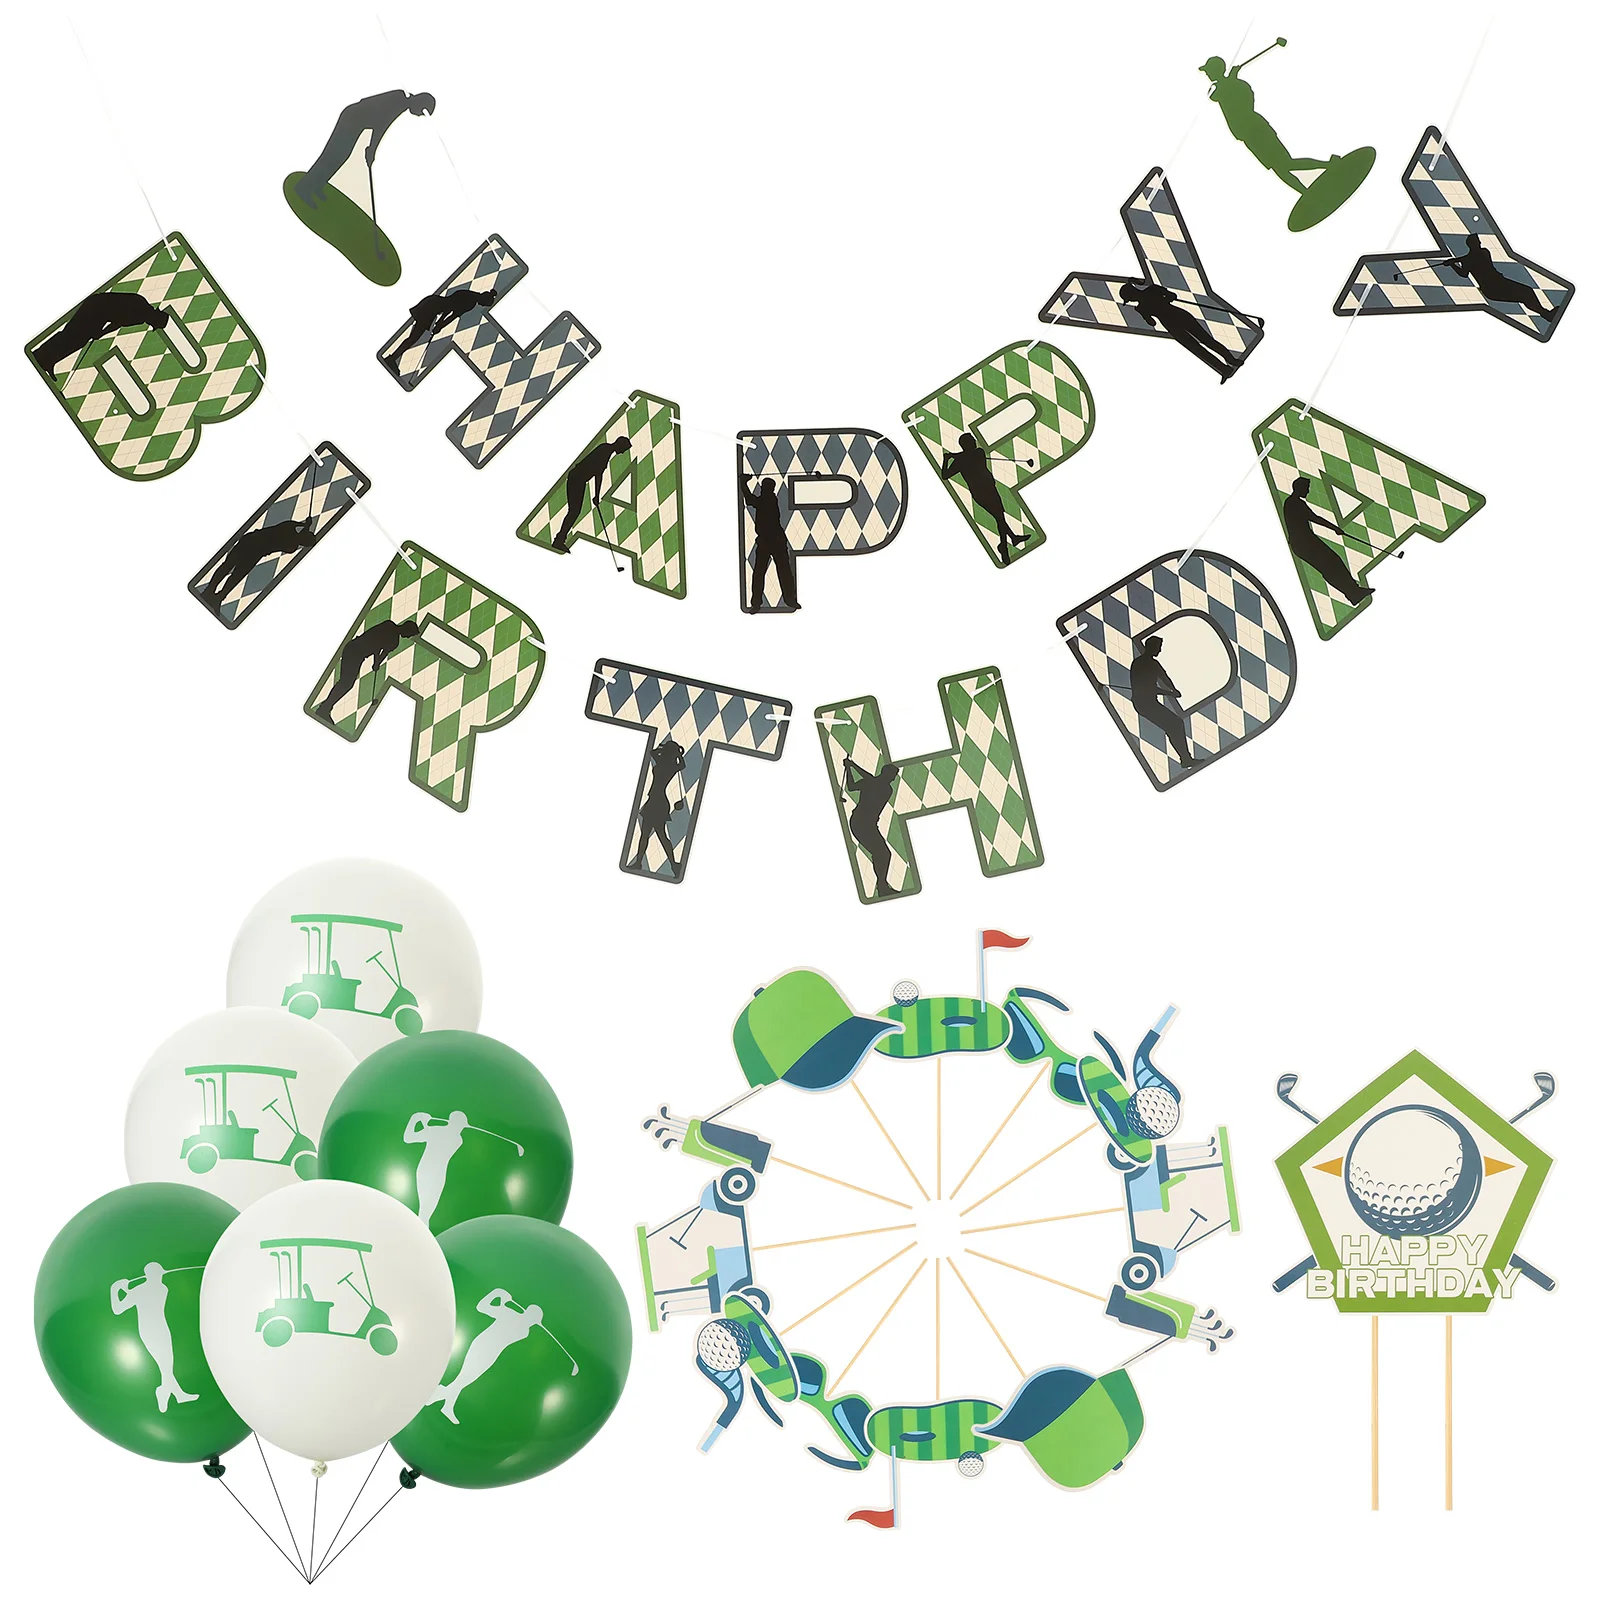 

Happy Birthday Decorations Delicate Balloons Decorative Golf Decorate Layout Props Party Banner